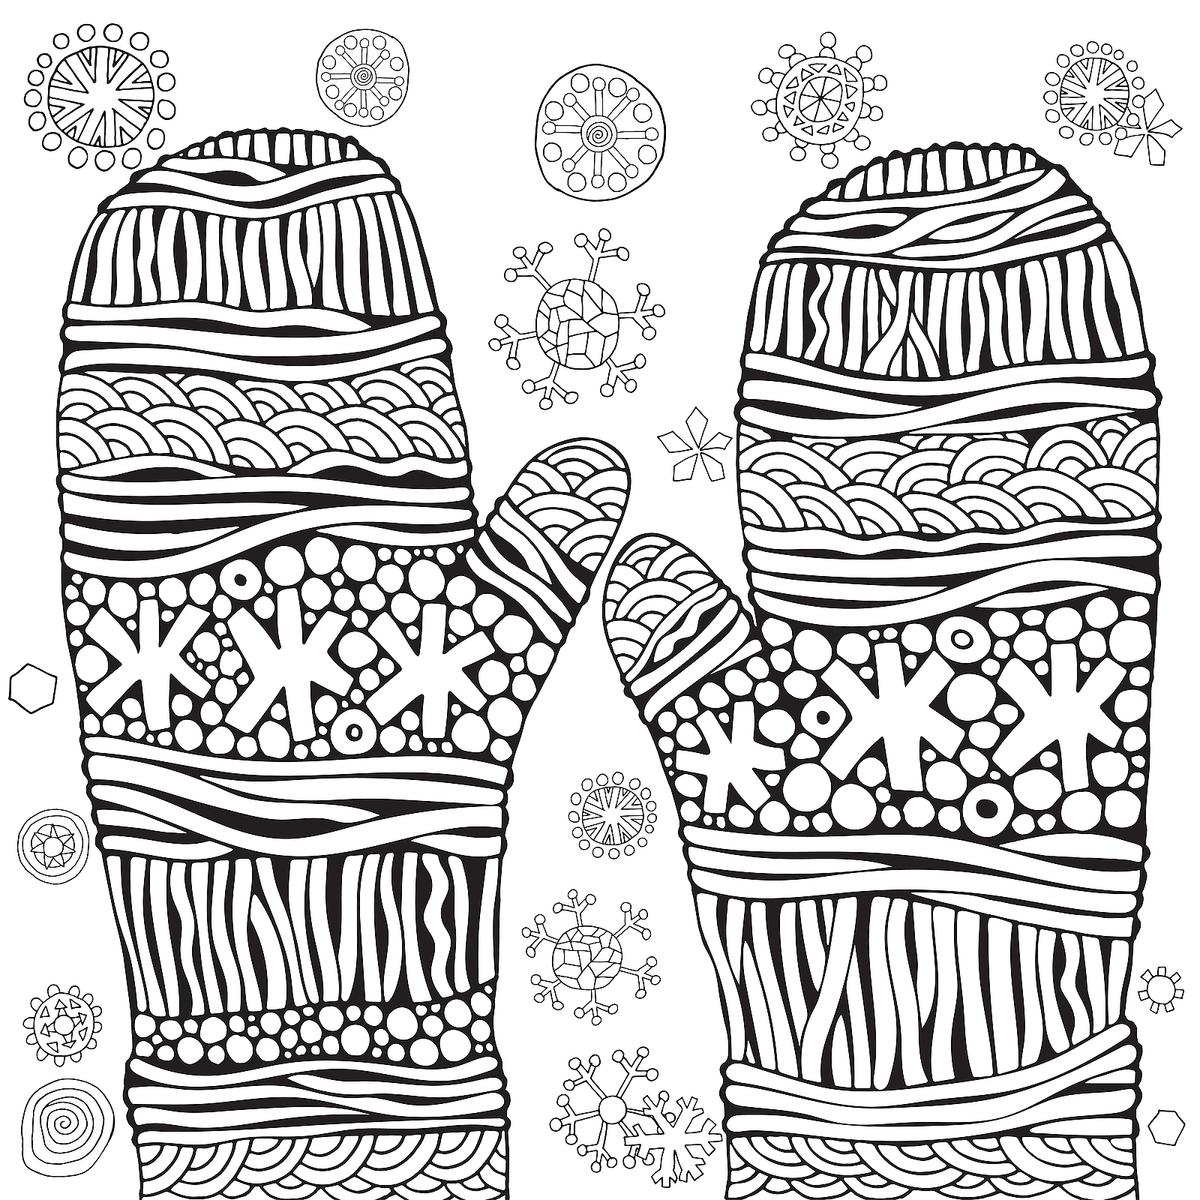 winter-puzzle-coloring-pages-printable-winter-themed-activity-pages-for-kids-printables